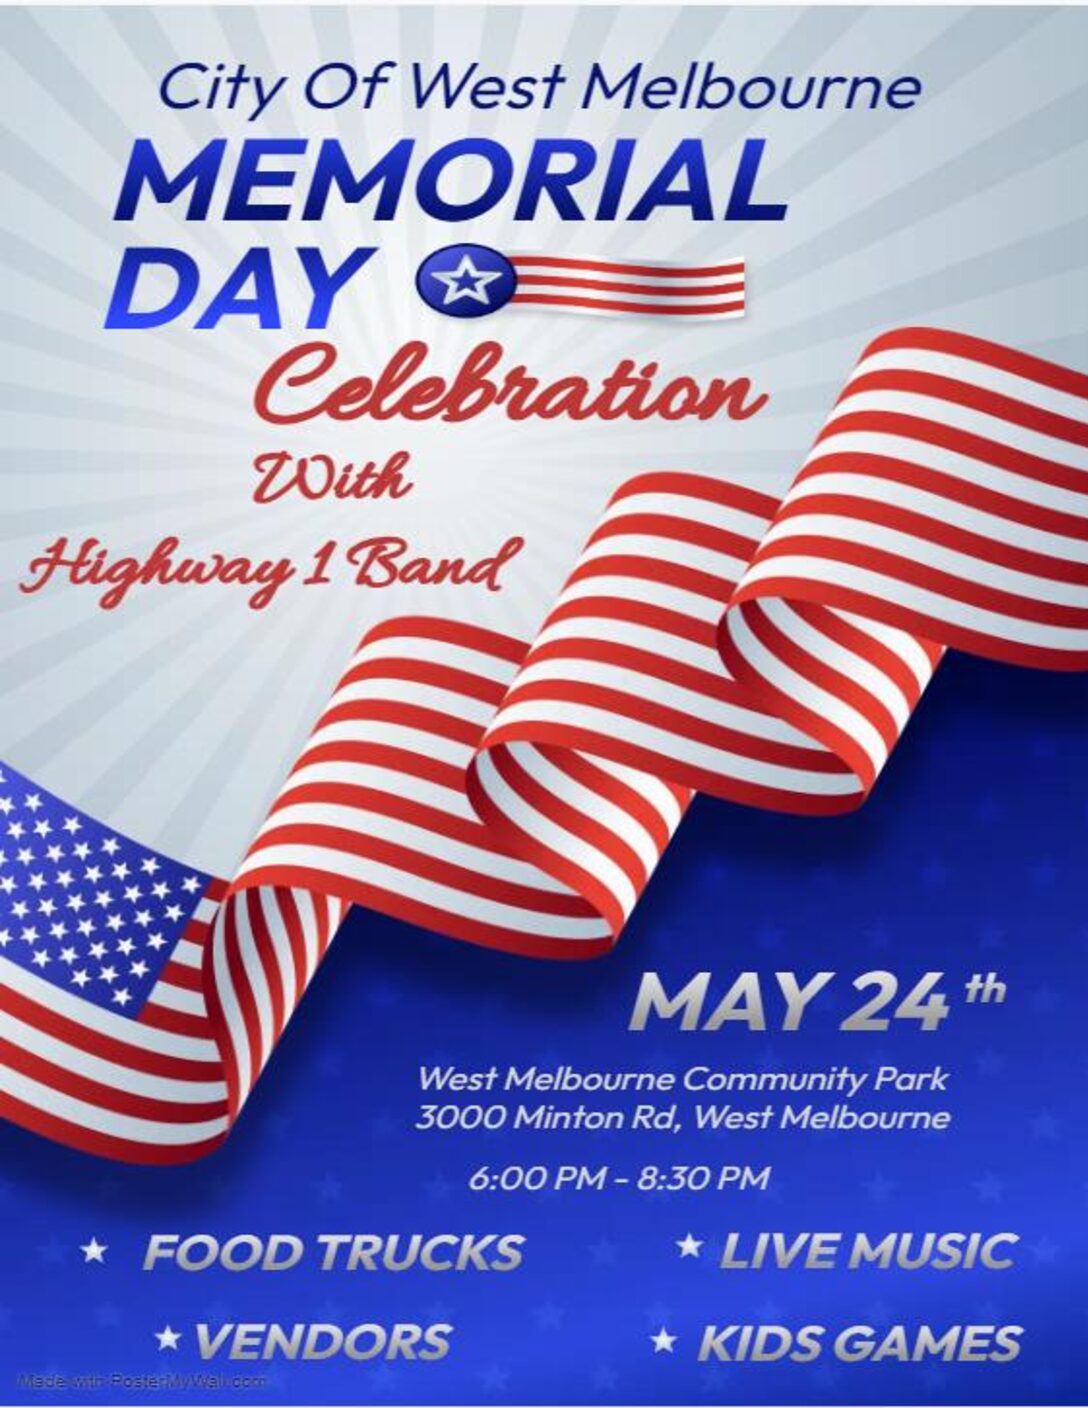 City of West Melbourne’s Memorial Day Celebration